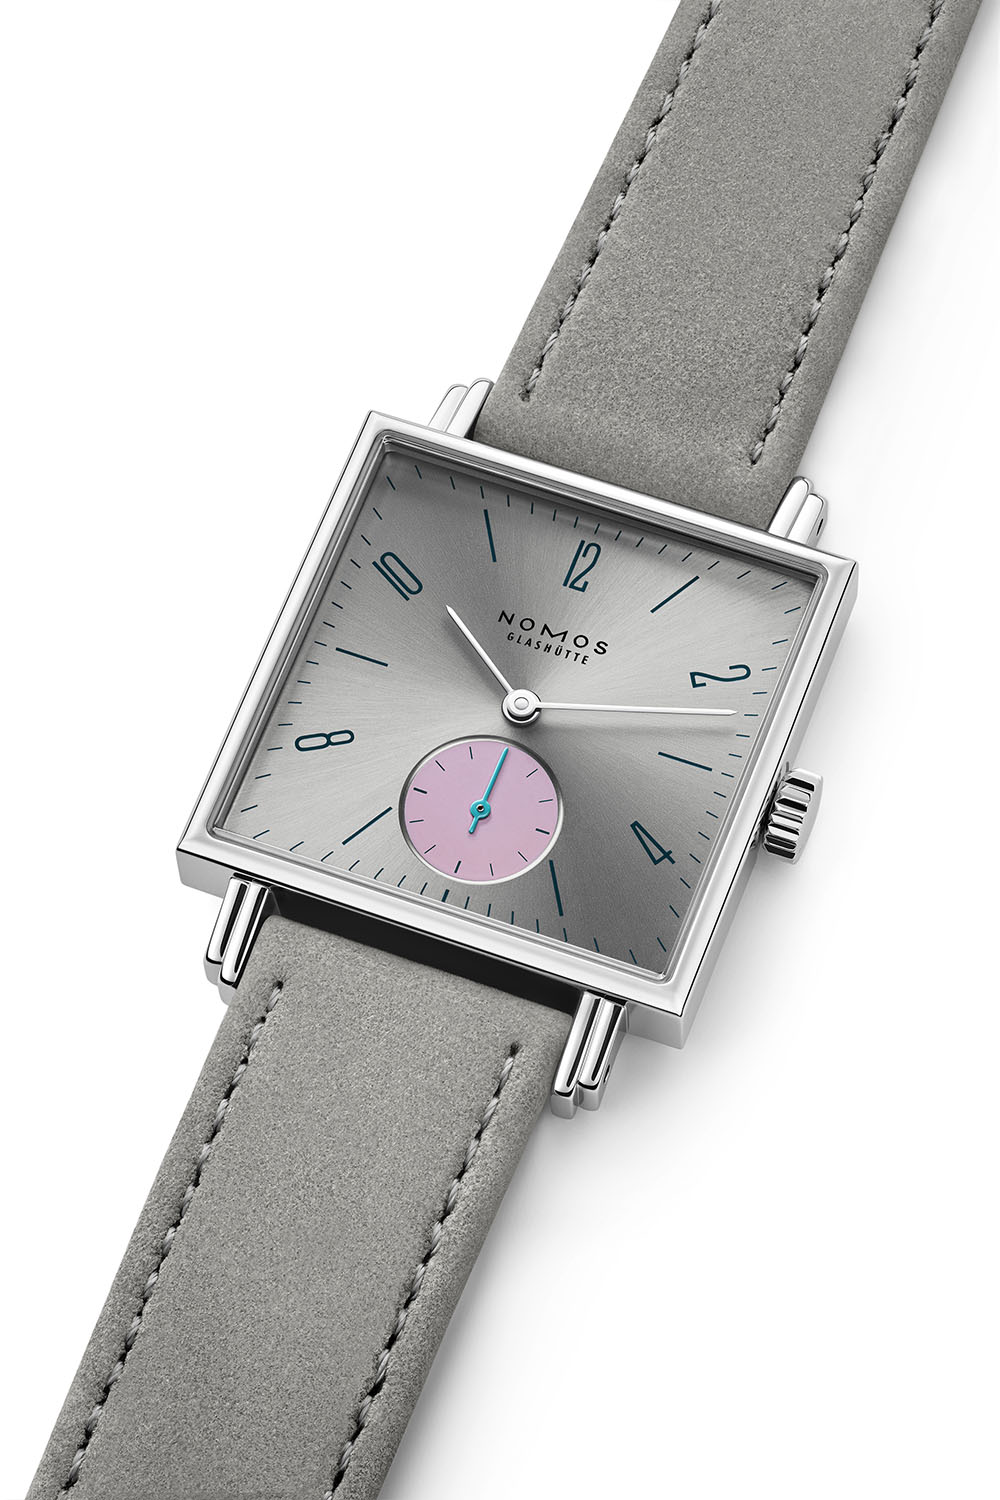 New Nomos Tetra Hand-Wound Alpha Square Watch Colours Easter 2023 - 7